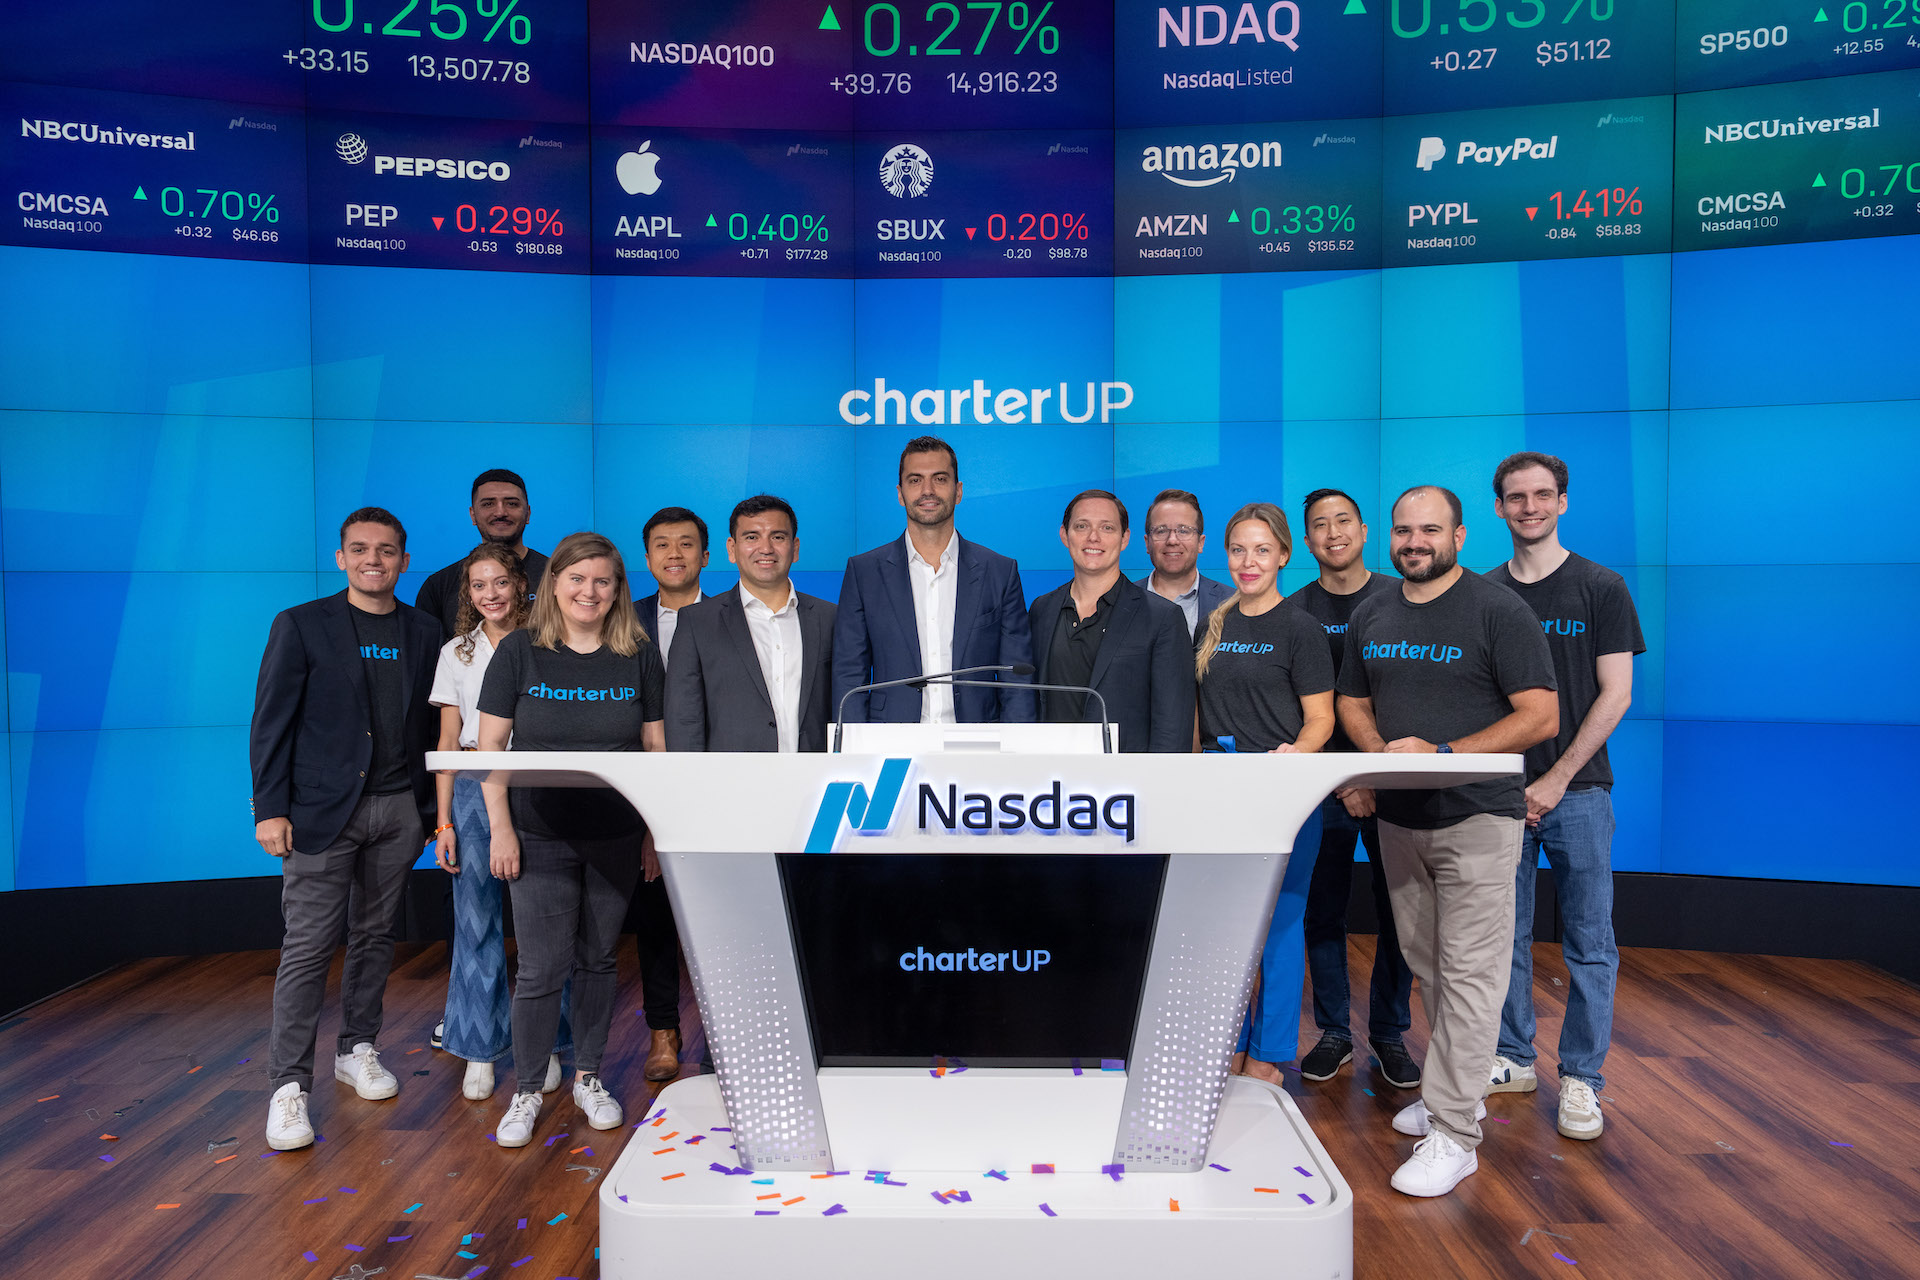 The CharterUP team was invited to Nasdaq's MarketSite in Times Square to celebrate ranking as the No. 2 fastest-growing private company in America on the Inc. 5000 list.